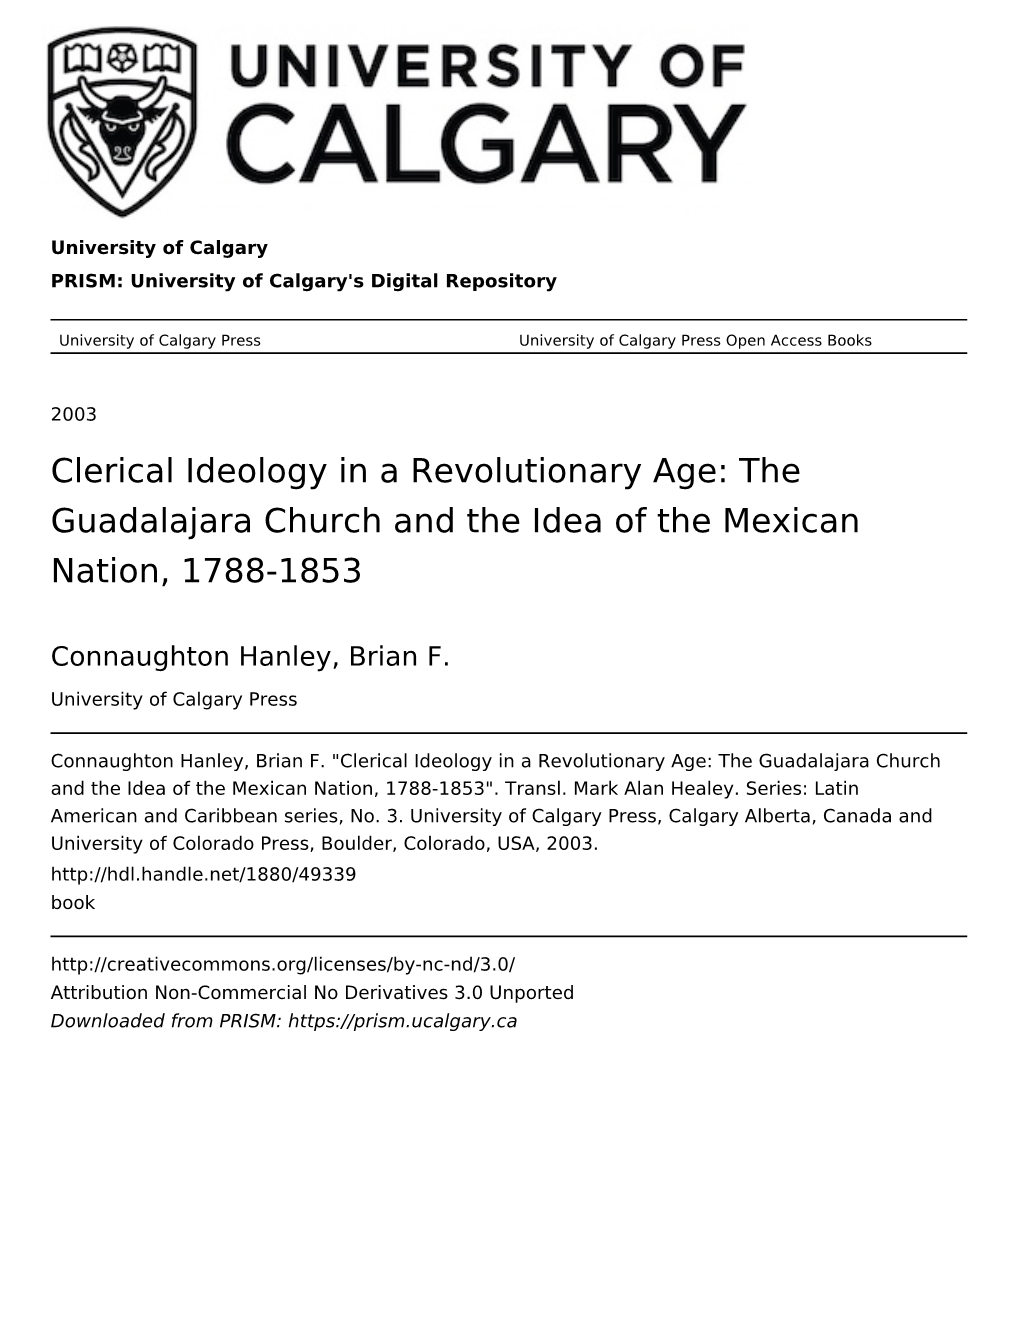 Clerical Ideology in a Revolutionary Age: the Guadalajara Church and the Idea of the Mexican Nation, 1788-1853